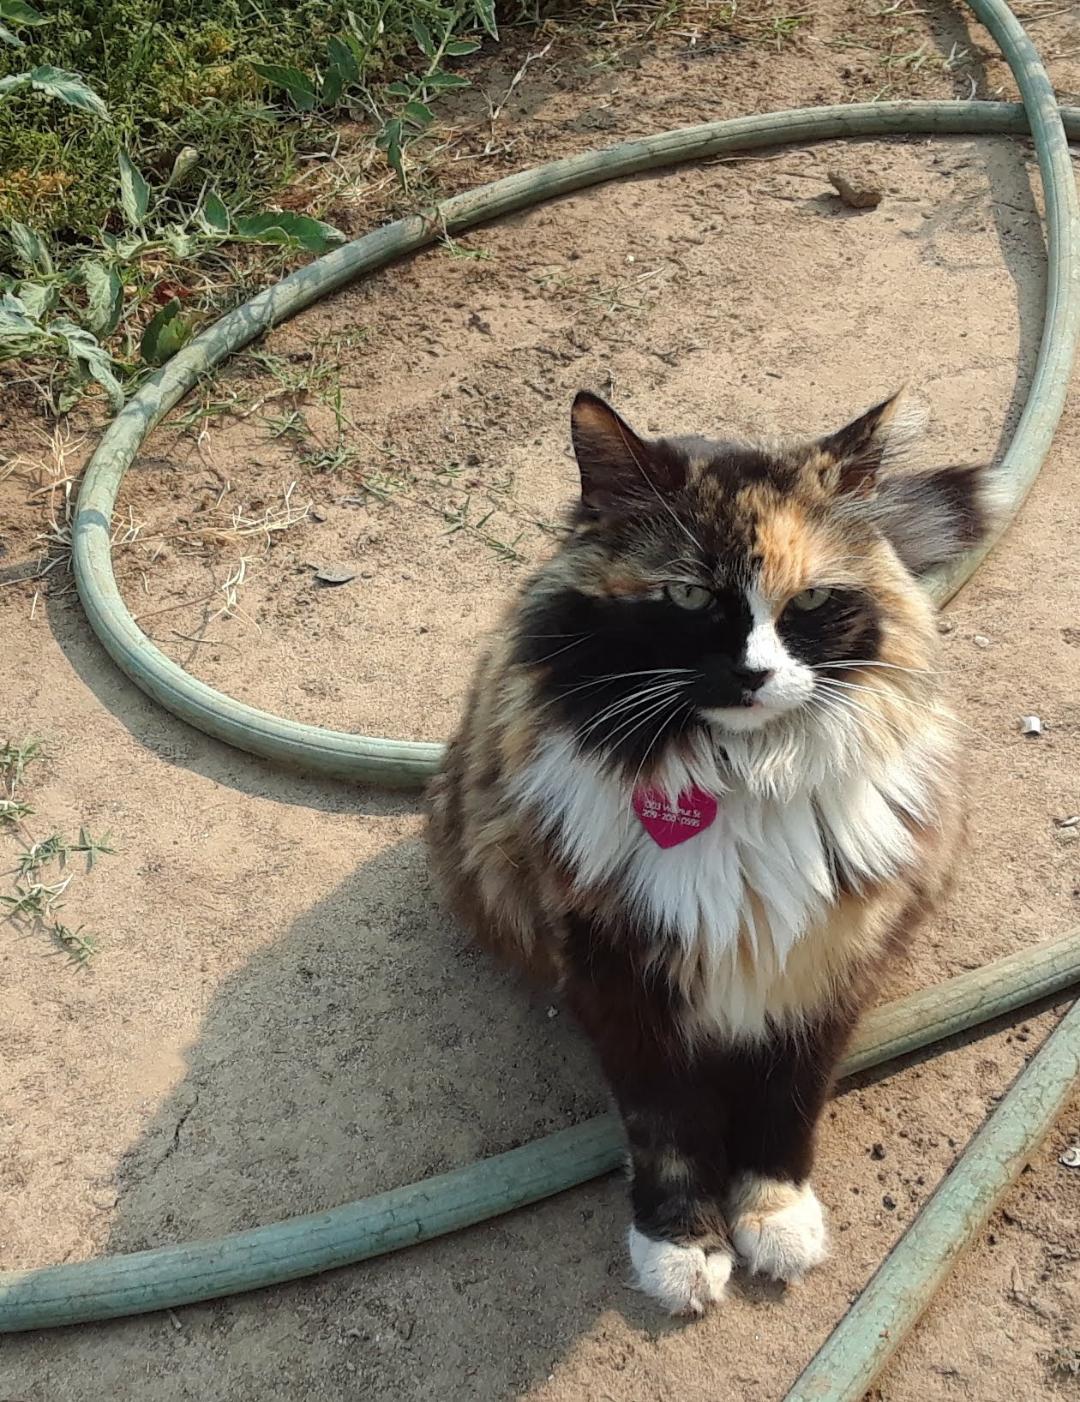 Helping me water the tomatoe plants...